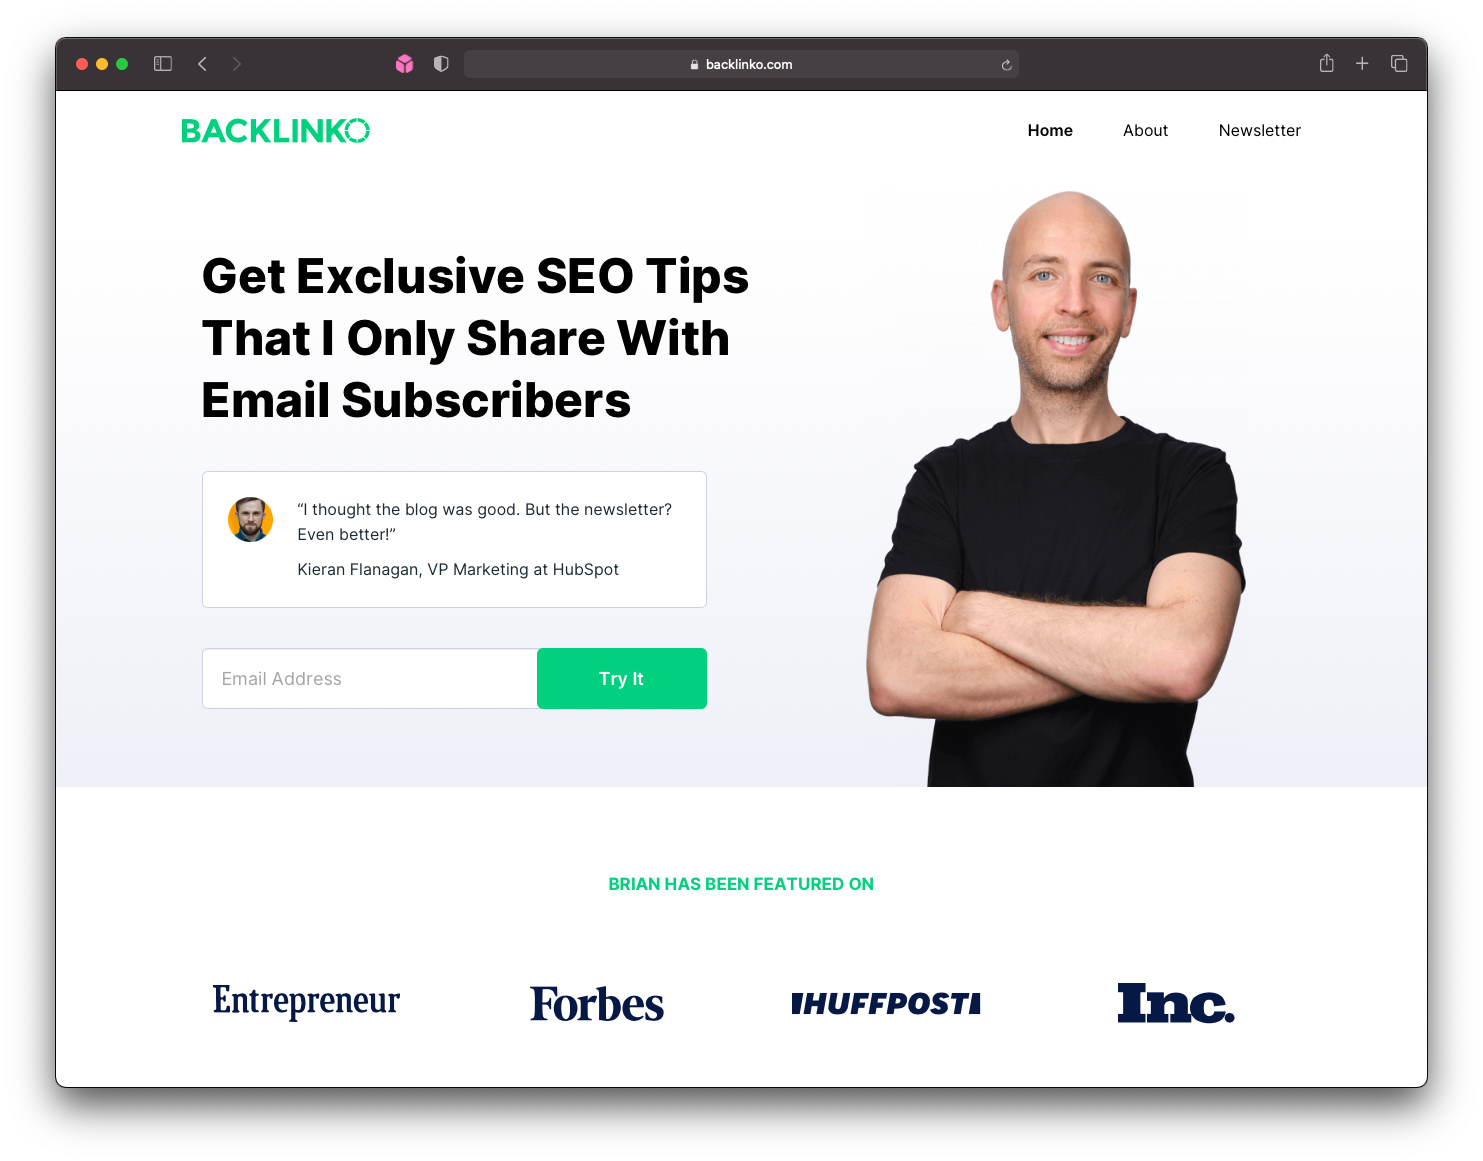 Backlinko is one of the world’s top websites for SEO tips, advice, and training